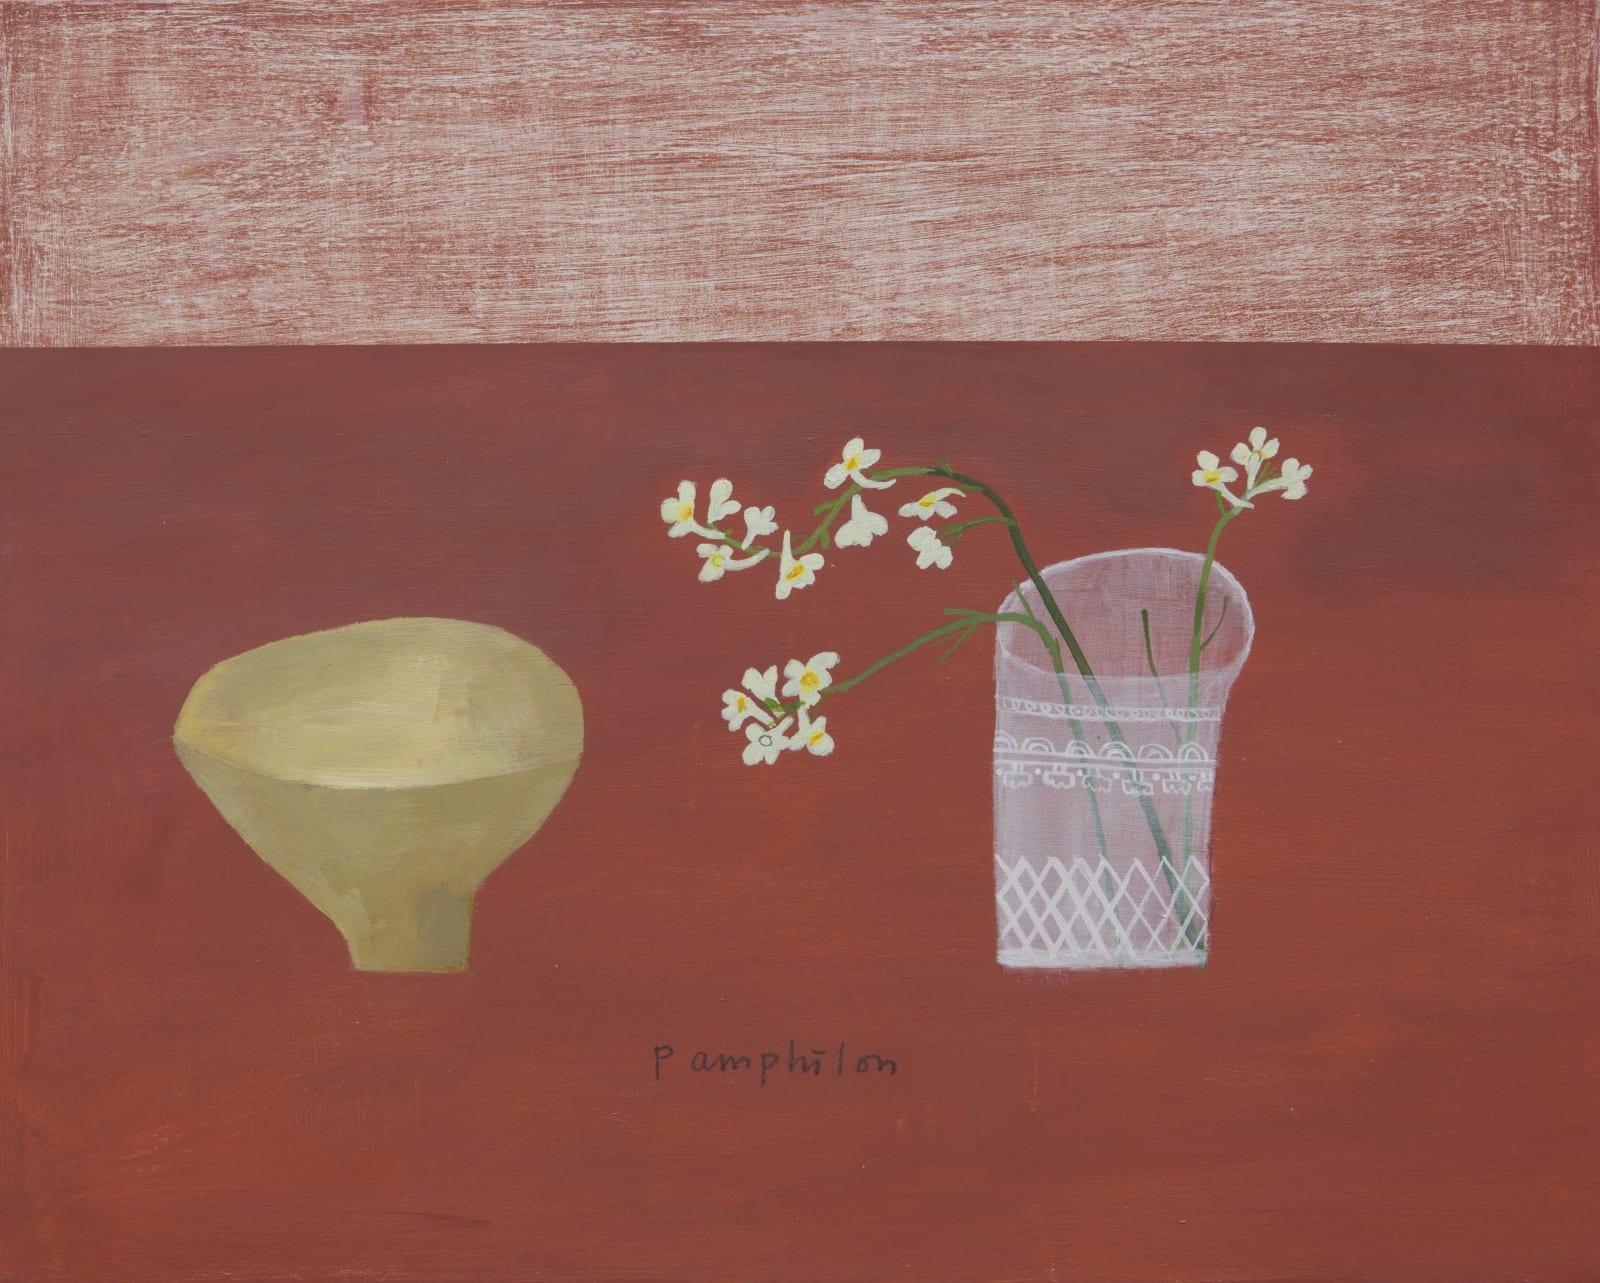 Elaine Pamphilon, Wildflowers and Lucie Rie Yellow Bowl